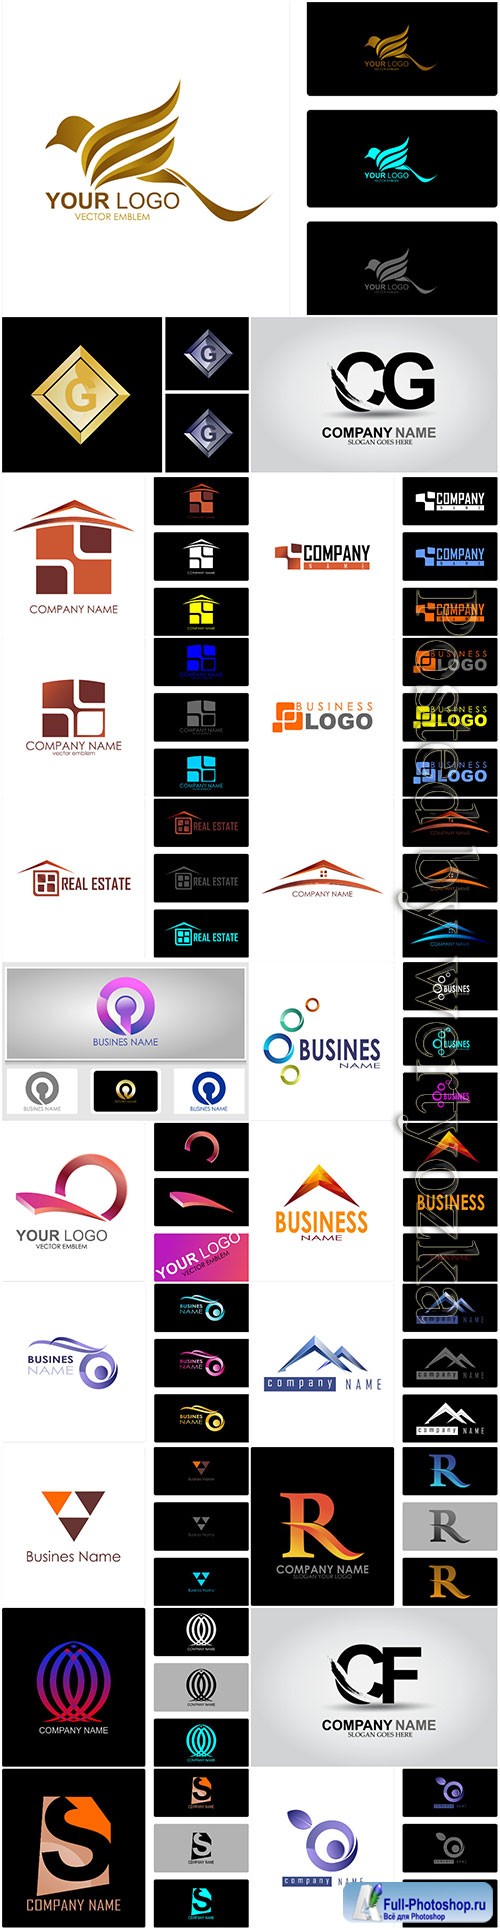 Logos in vector, business icons, emblems, labels # 10